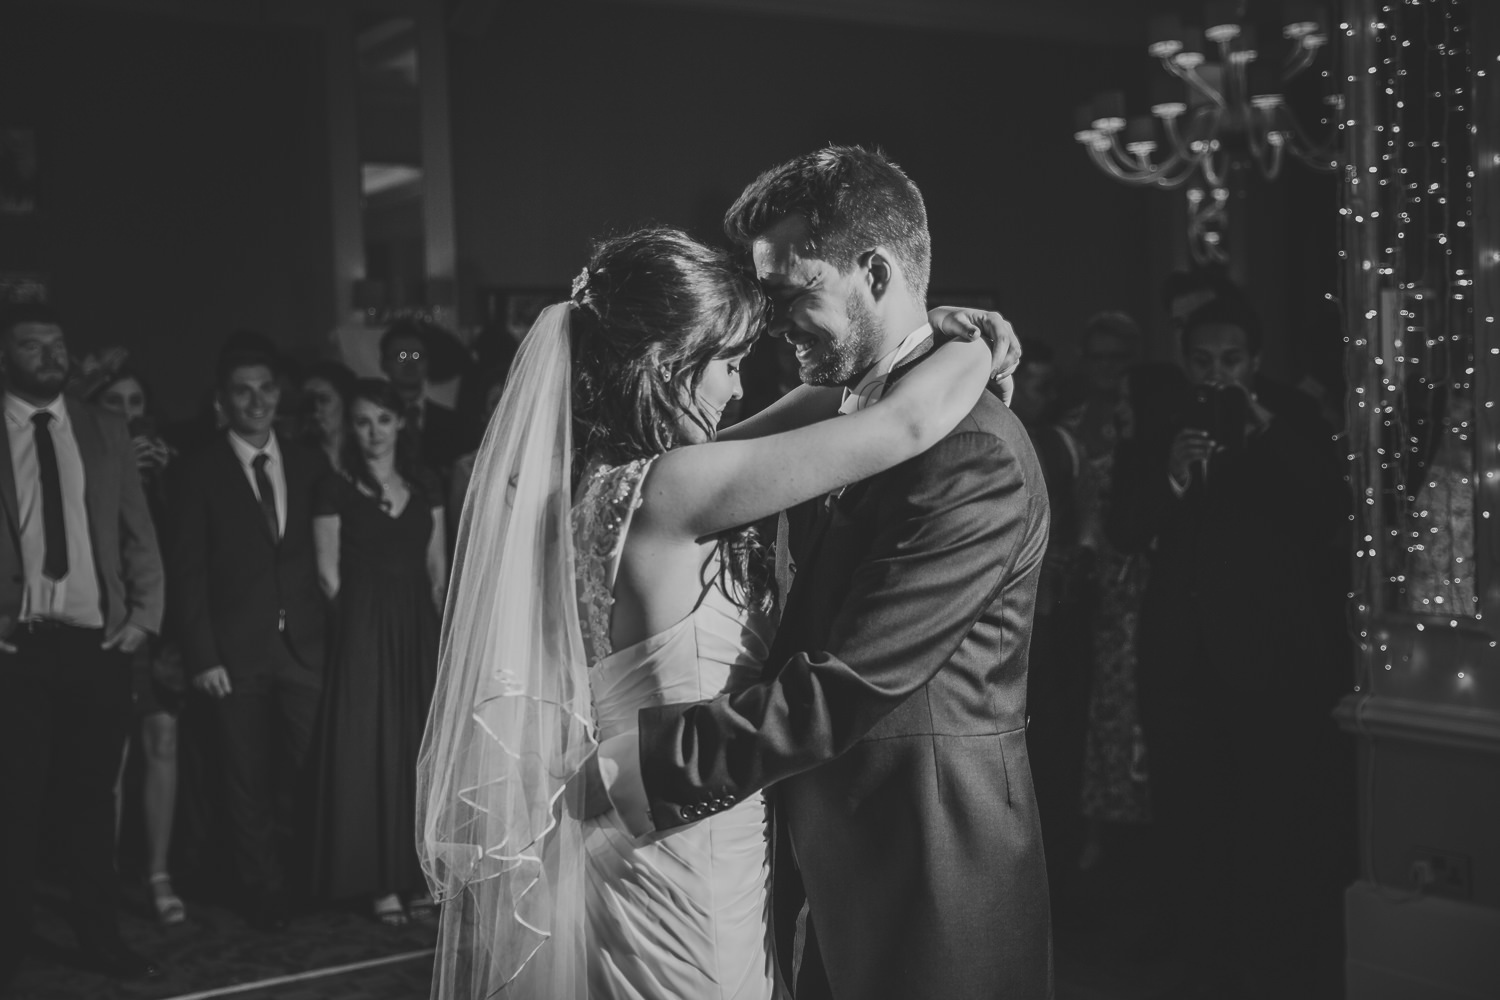 Black and white wedding photo of bride and groom during first dance in Richmond Hill Hotel, London